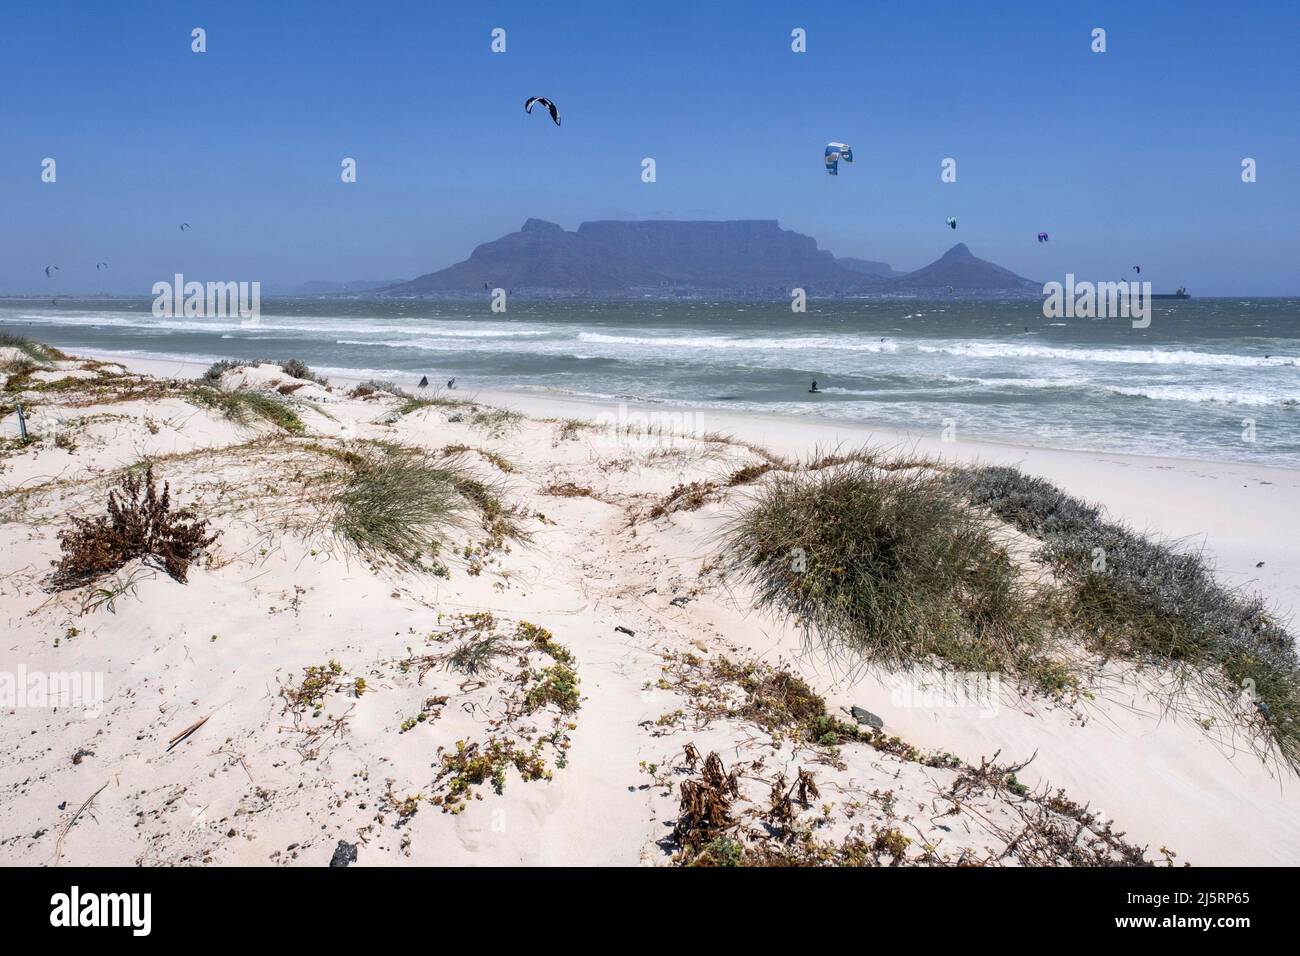 Table Mountain and white sandy beach at Bloubergstrand along the Atlantic Ocean at Table Bay near Cape Town / Kaapstad, Western Cape, South Africa Stock Photo